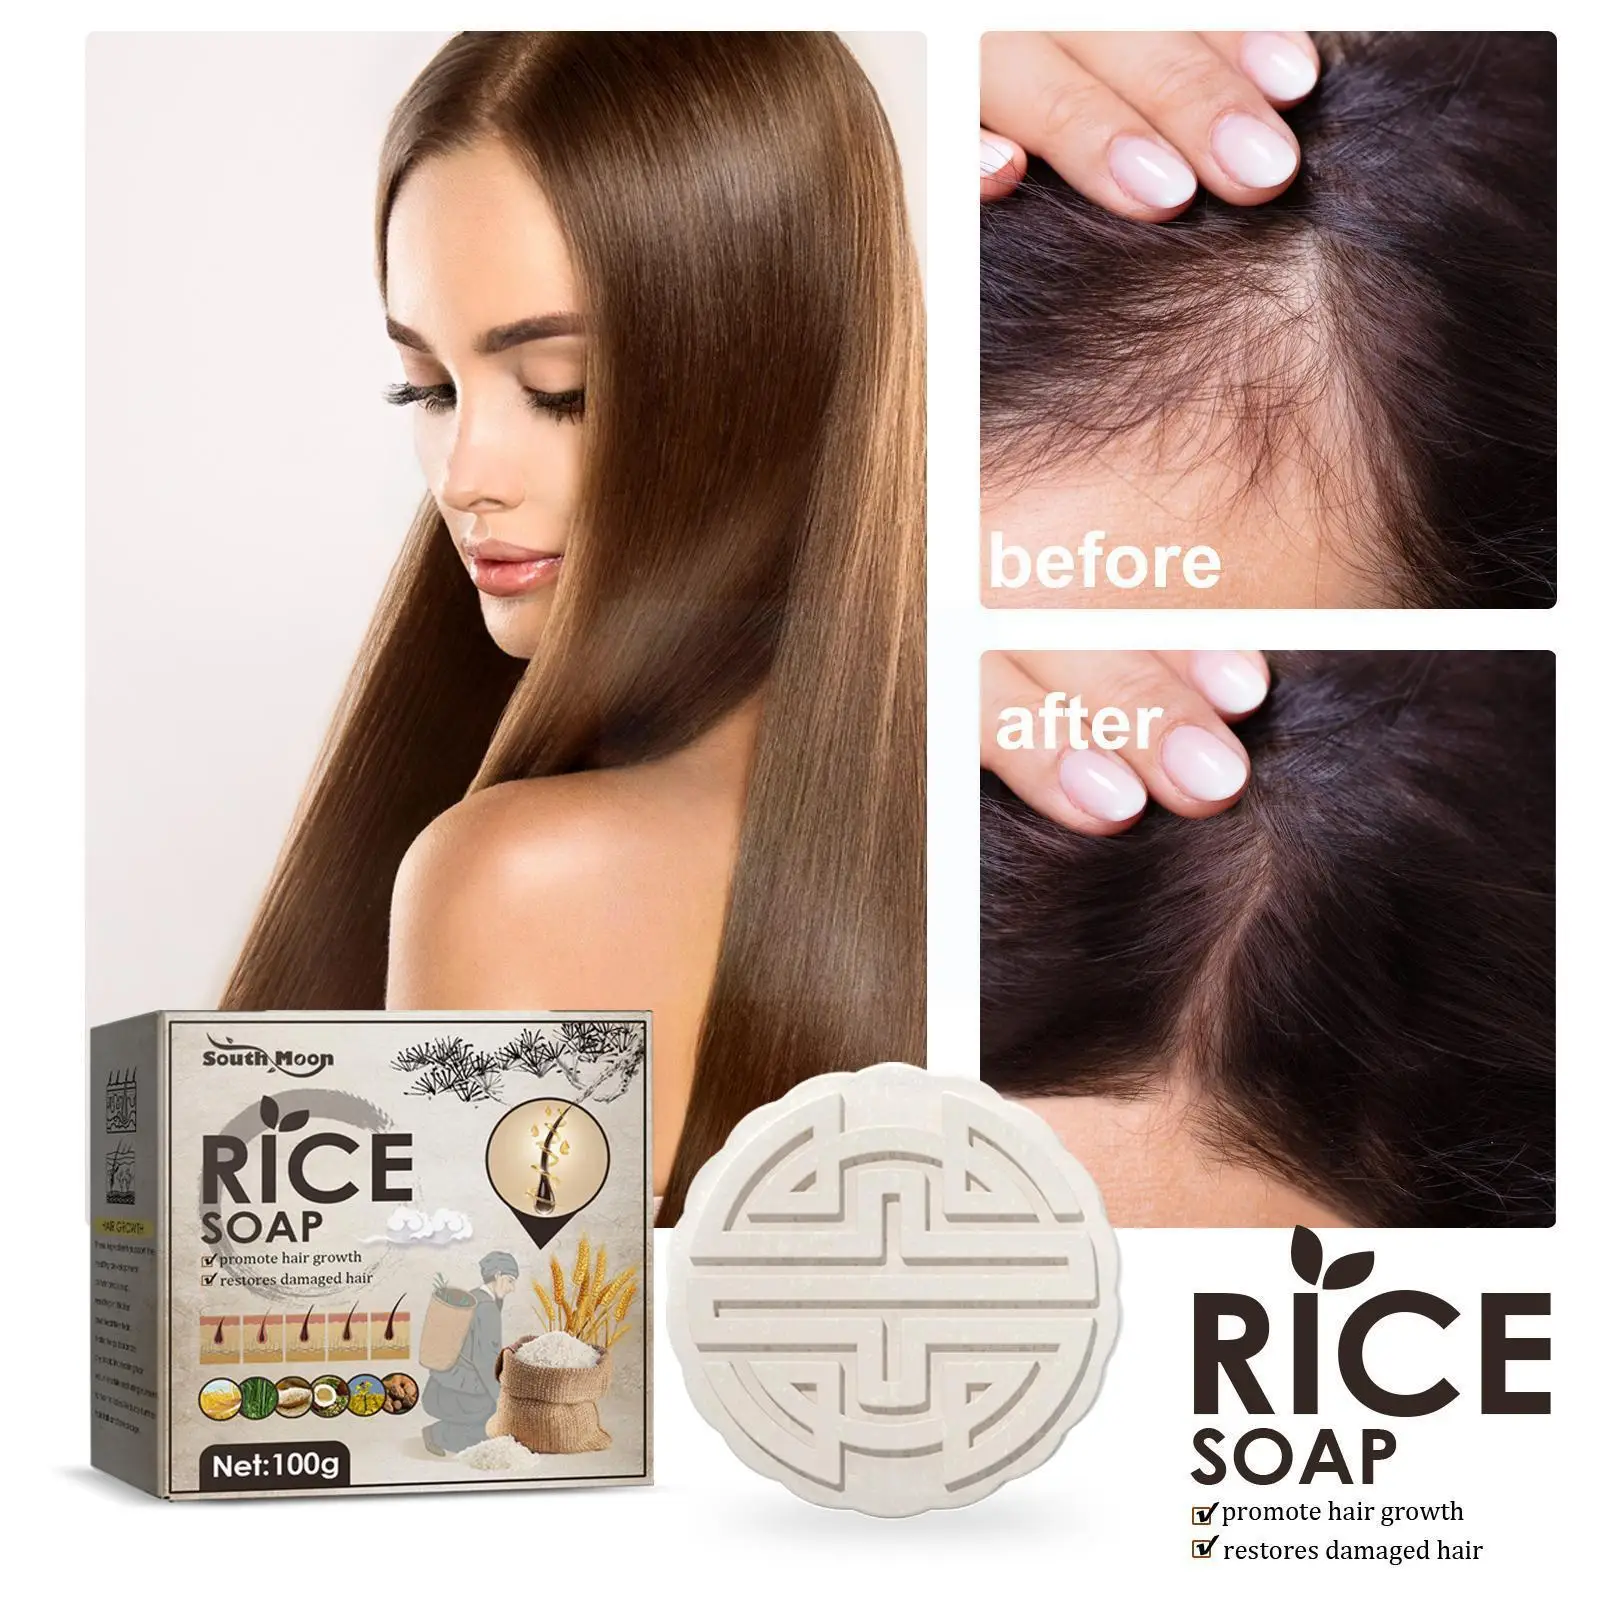 

100g Rice Shampoo Soap Handmade Rice Soap Gentle Nourishing Growth I0v5 Hair Soap Care Cleansing Shampoo Water Conditioner K2H2